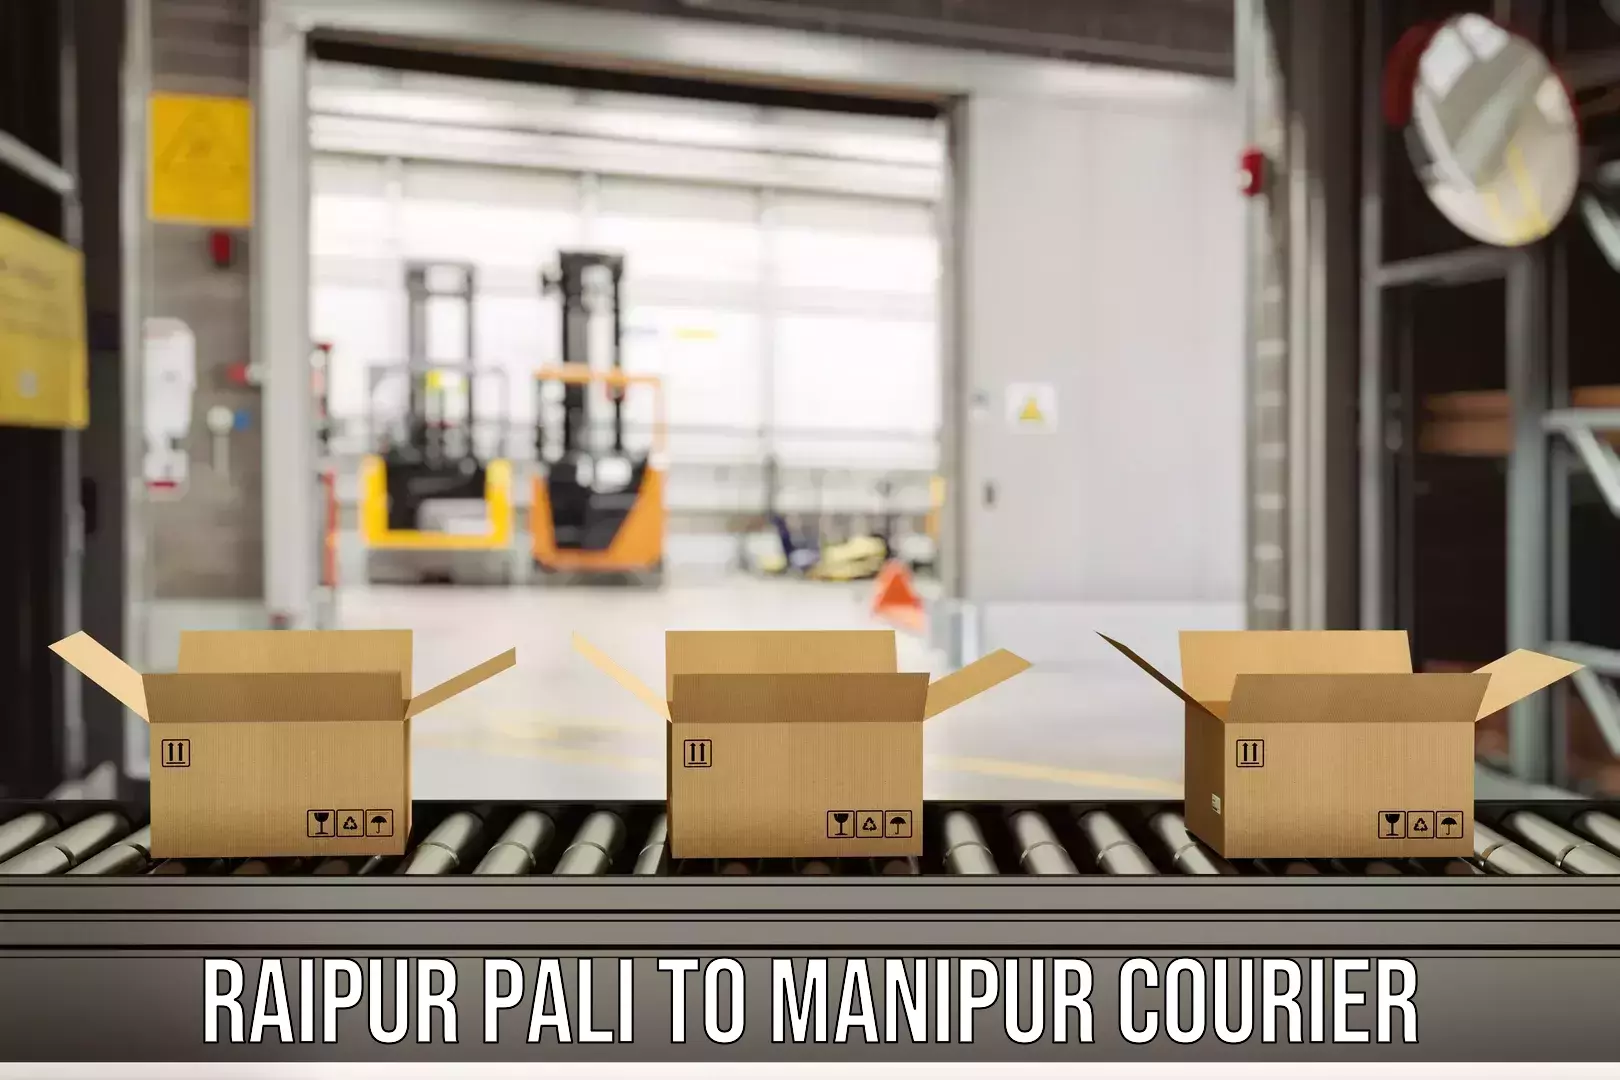 End-to-end delivery Raipur Pali to Chandel